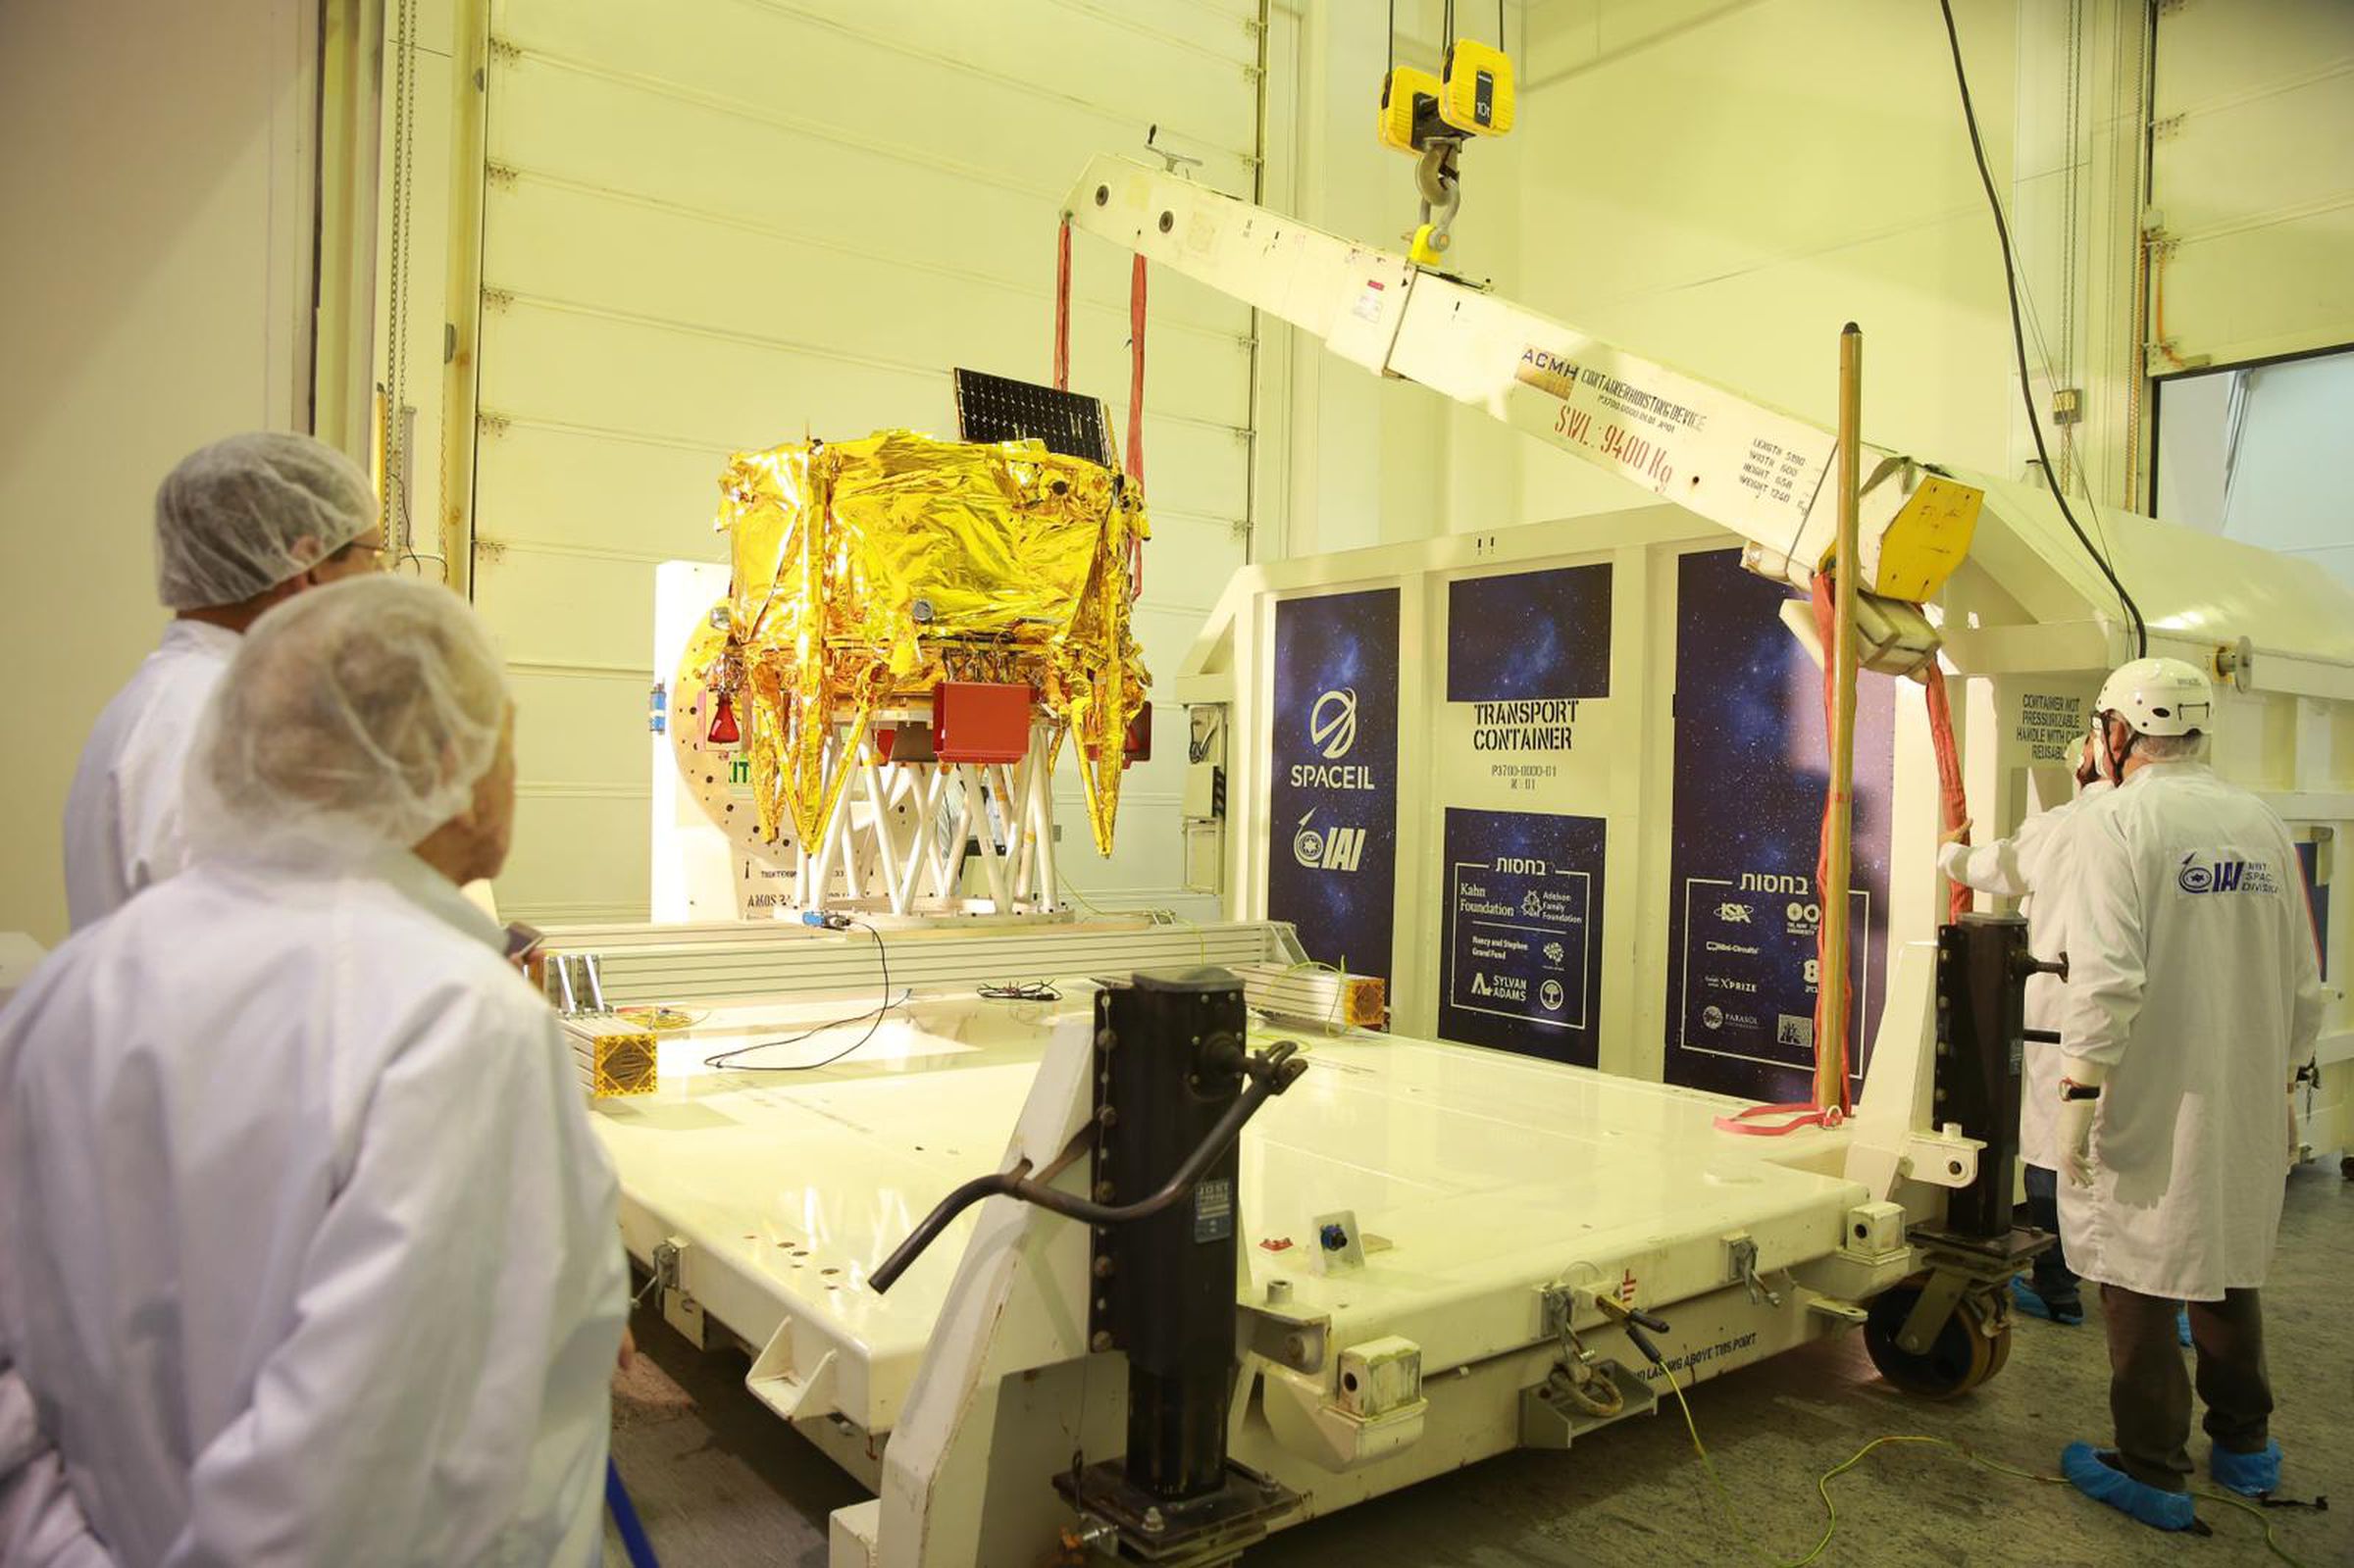 SpaceIL’s lander being prepped for launch.